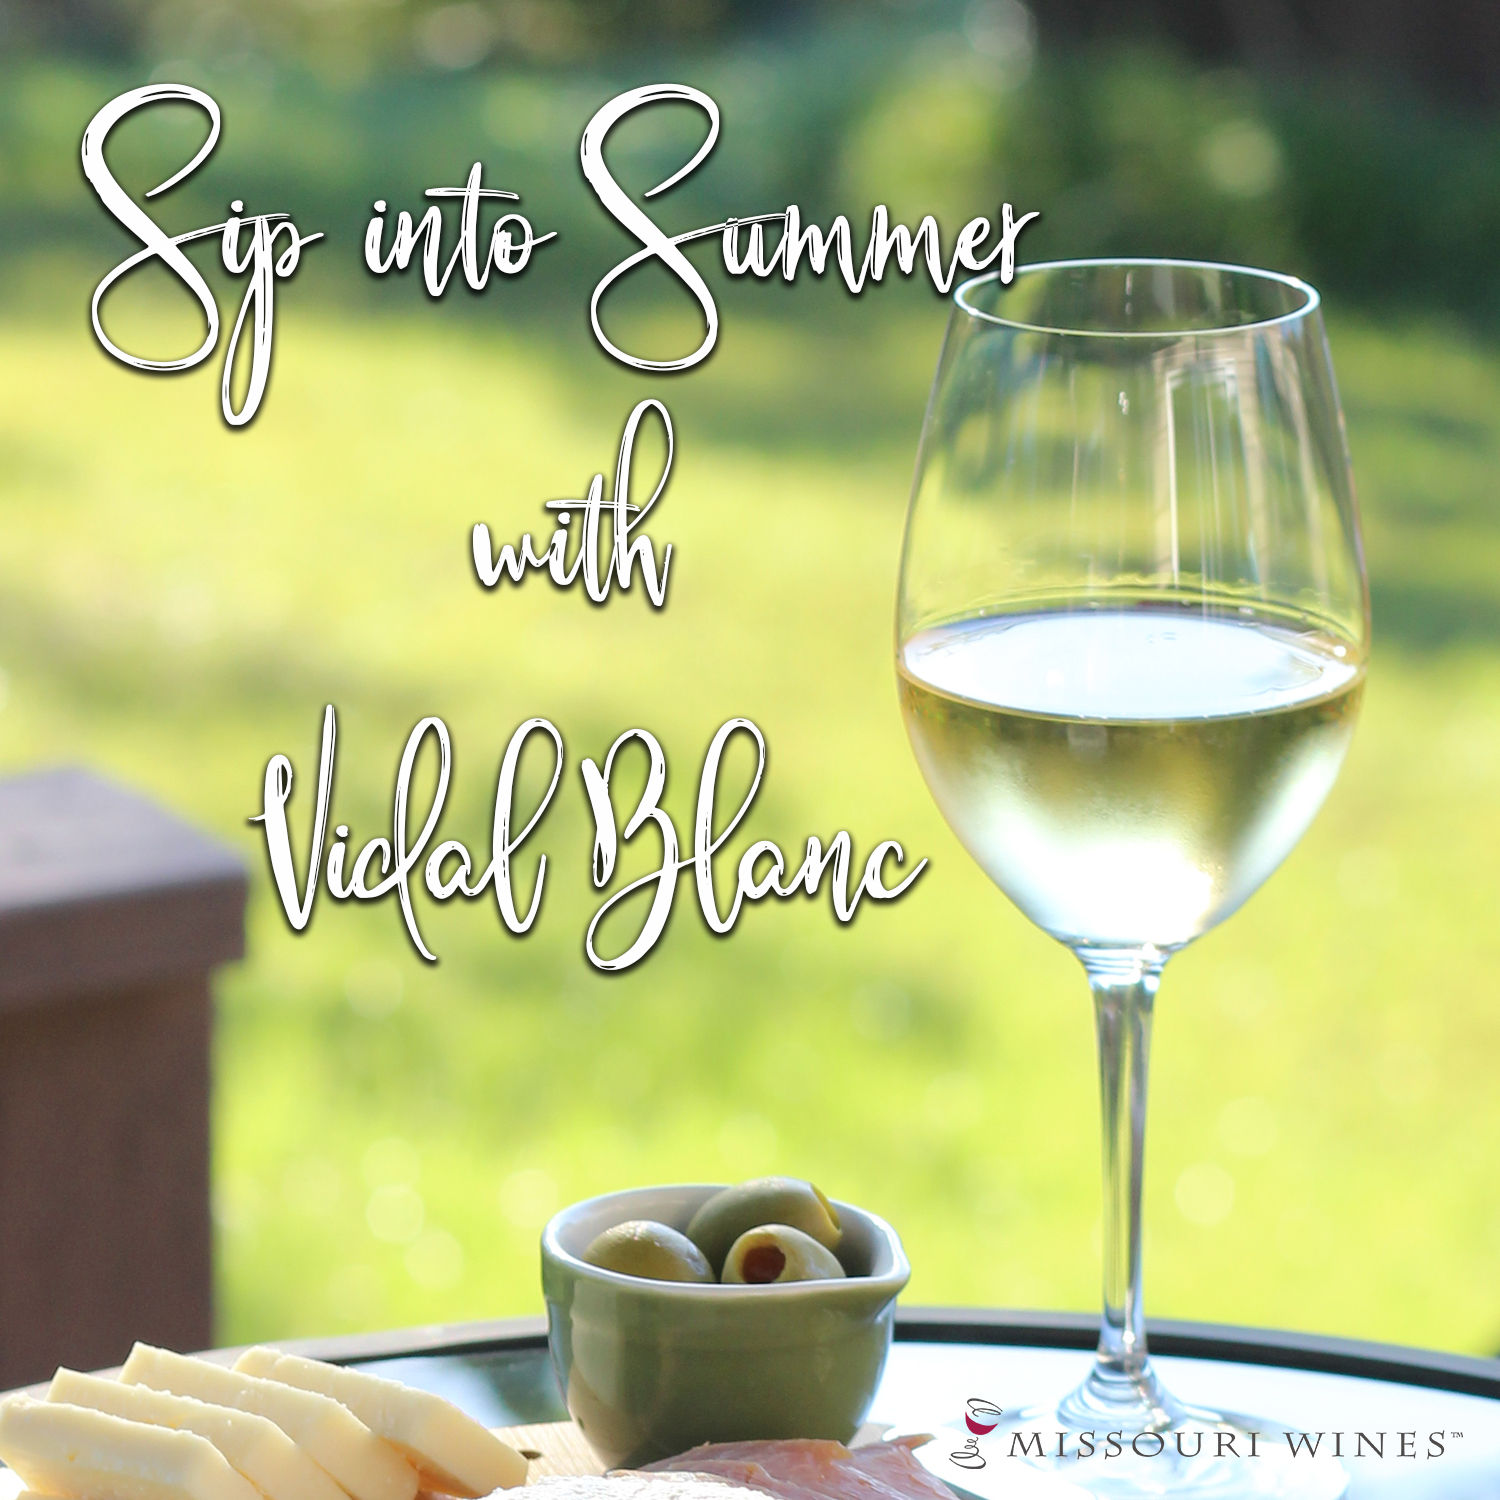 Sip into Summer with Vidal Blanc